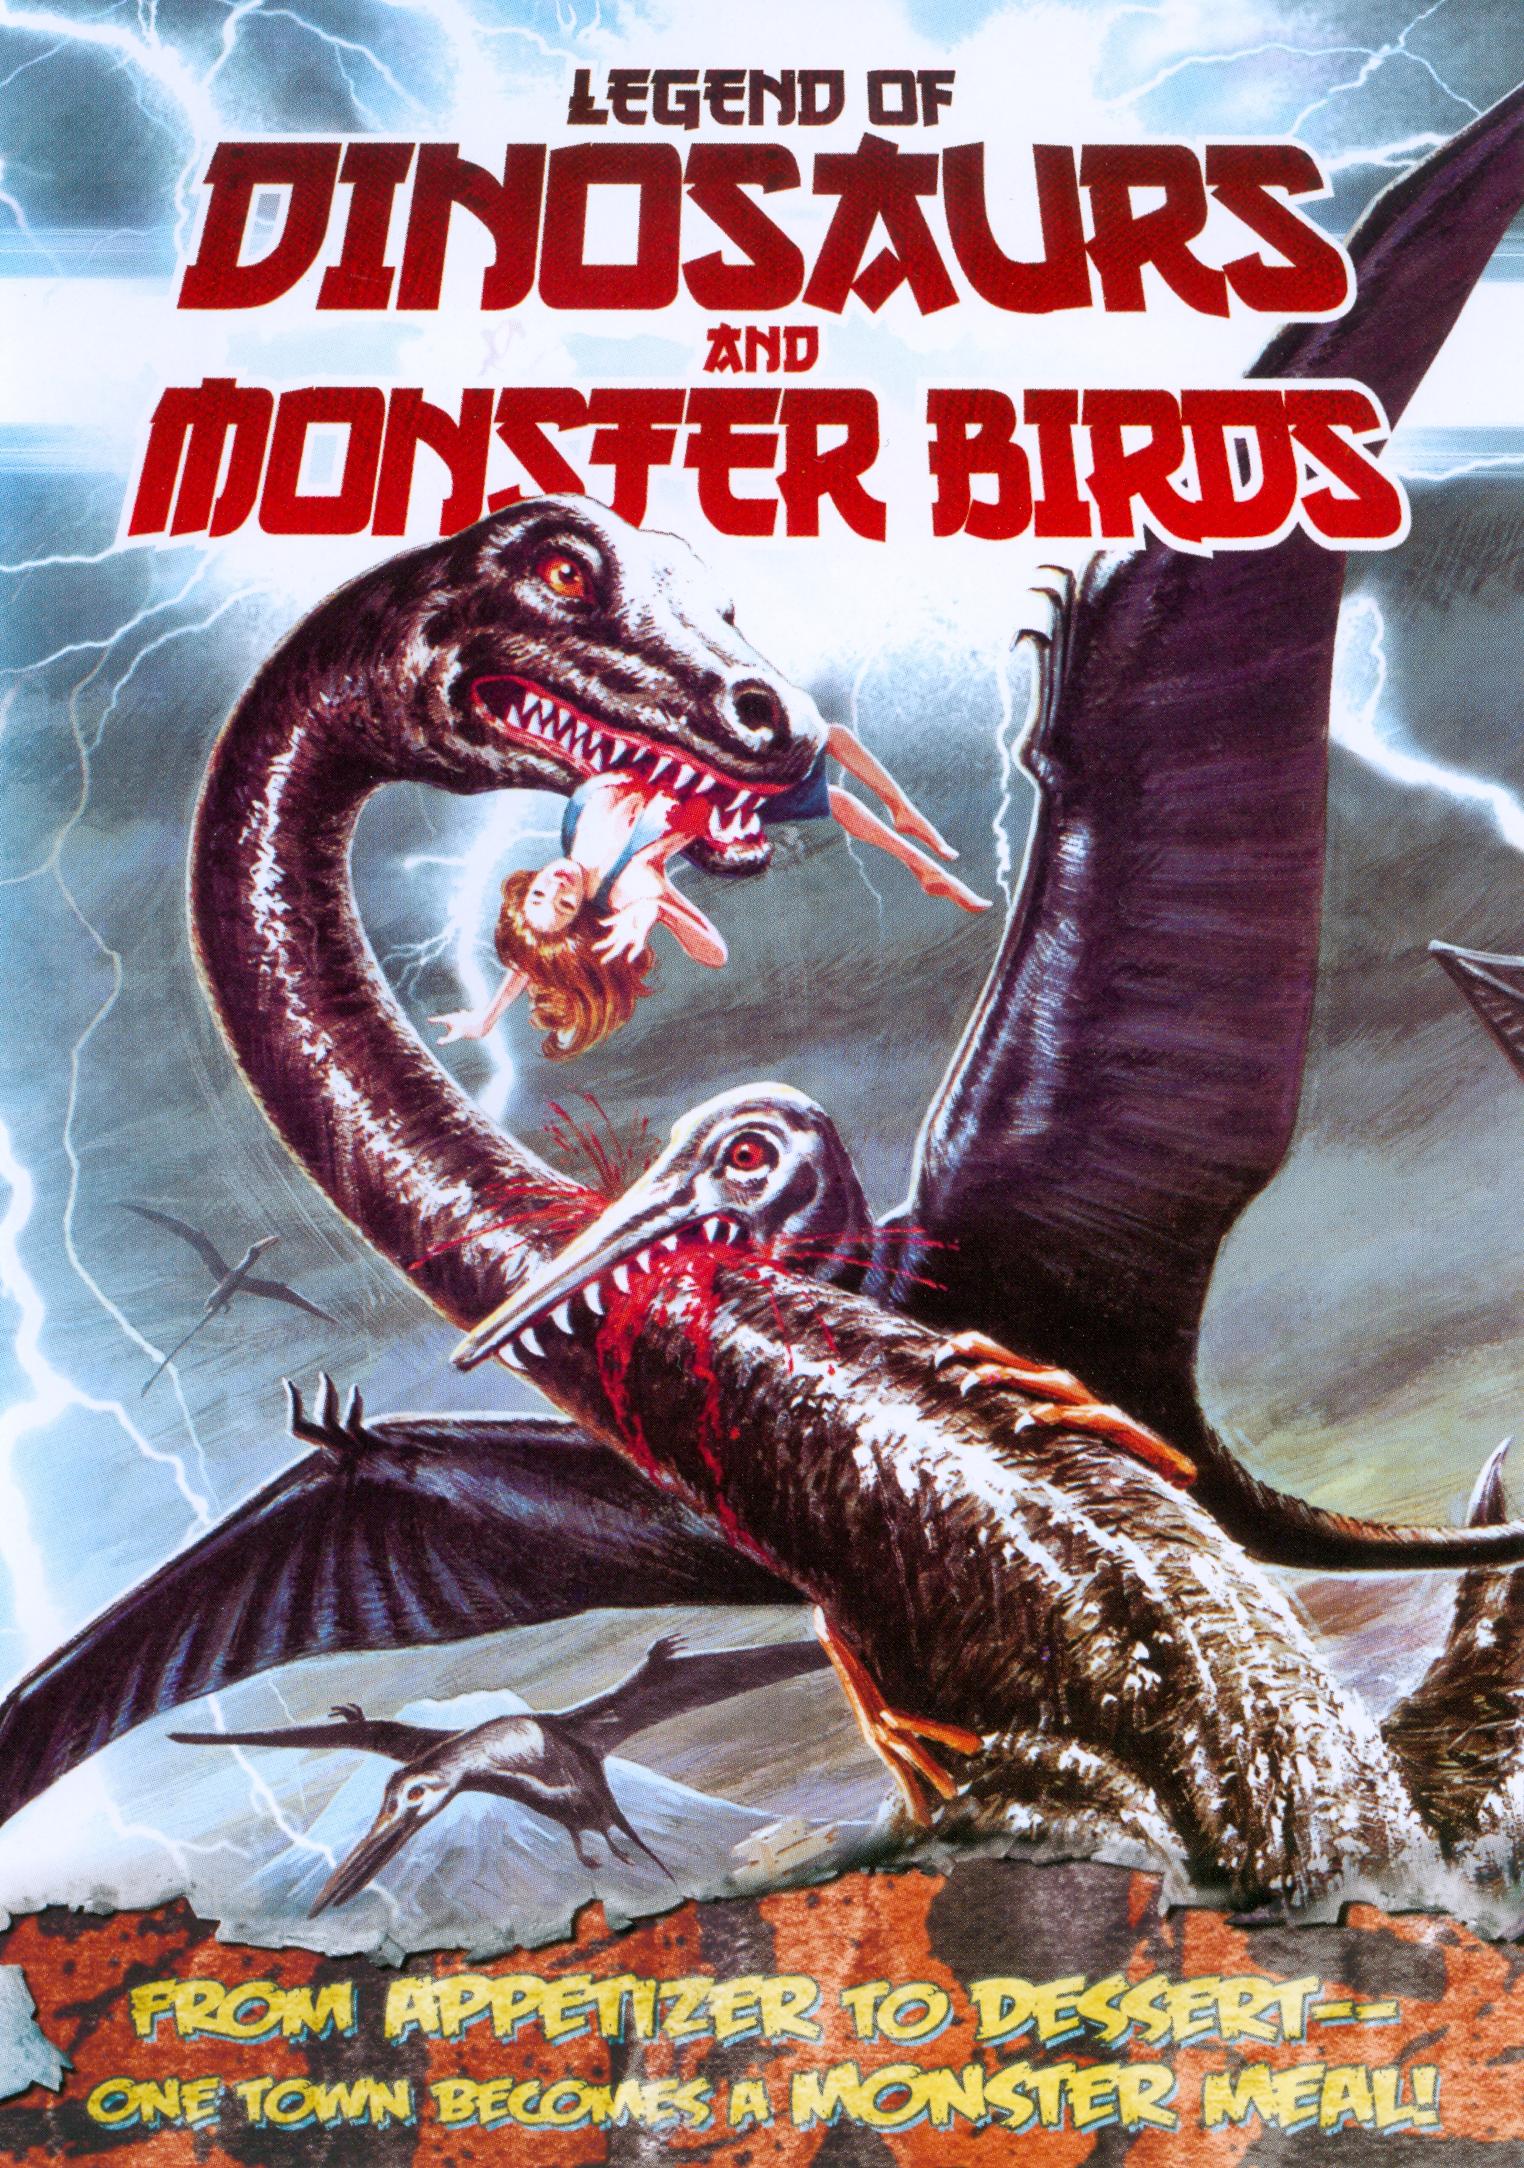 legend of dinosaurs and monster birds